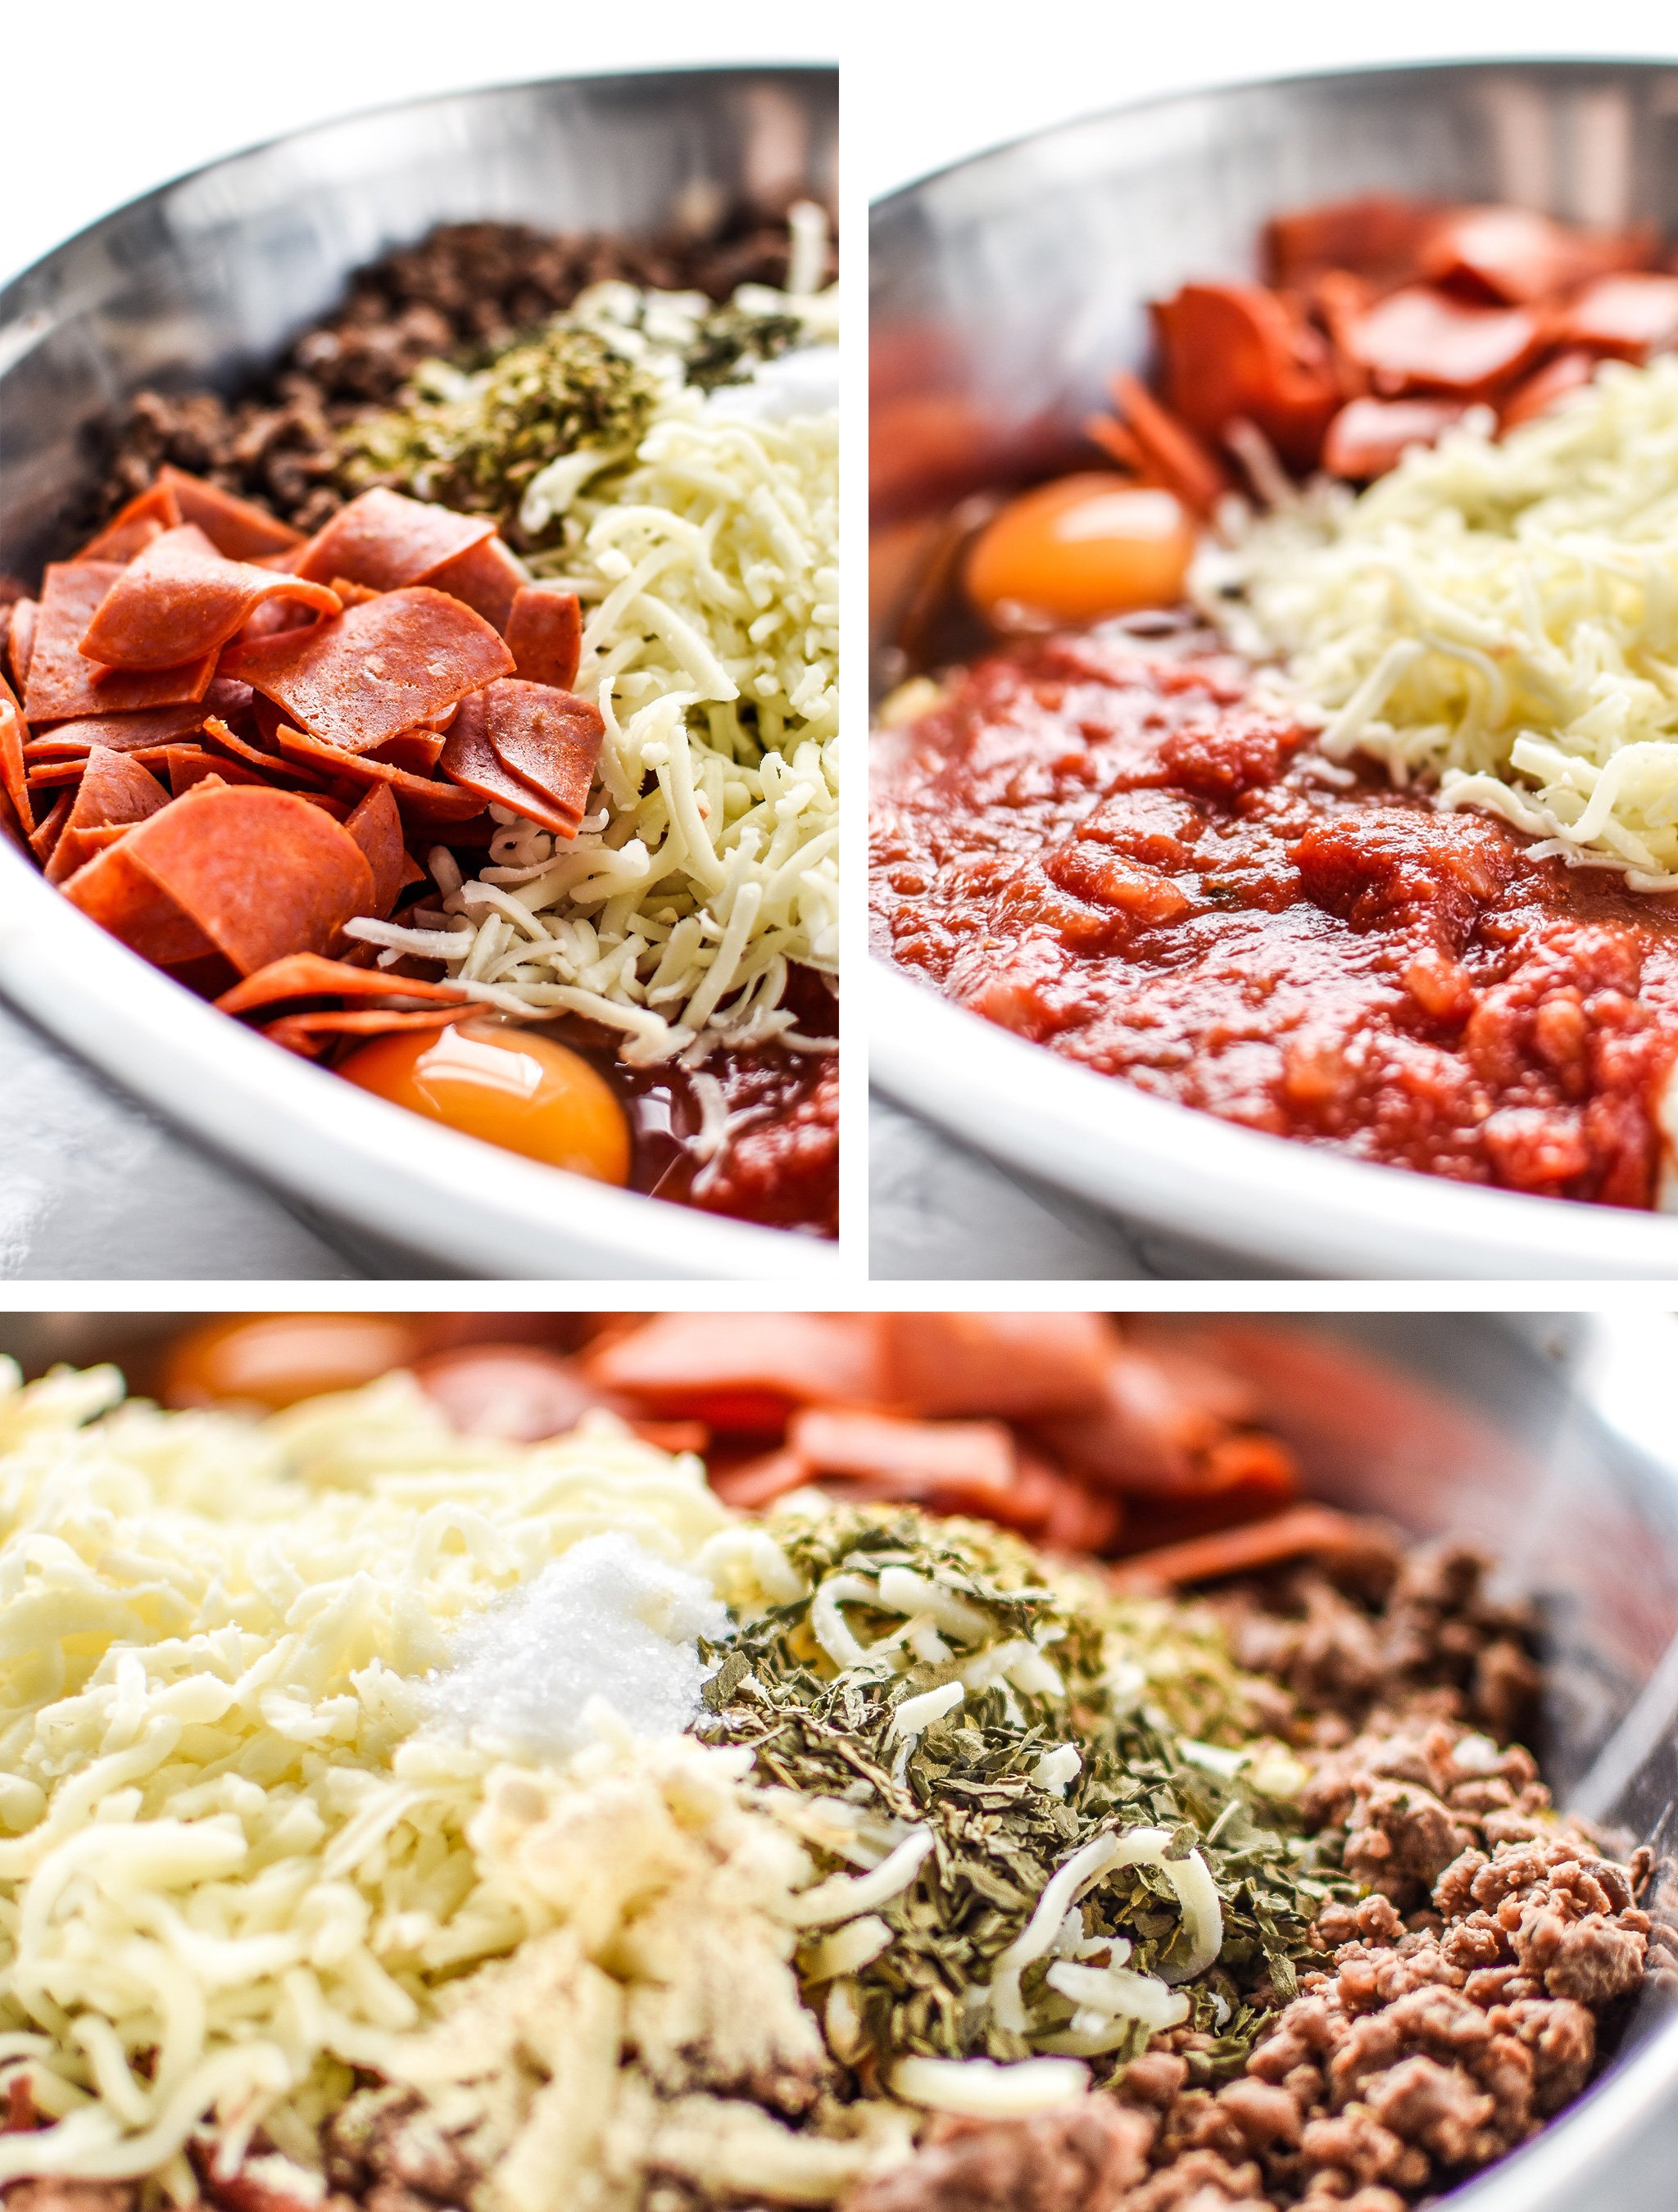 All the ingredients for the Meat Lover's Spaghetti Squash Pizza Casserole - It's pizza, but morphed into a not-that-bad-for-you spaghetti squash casserole with meat lover's toppings! - ProjectMealPlan.com